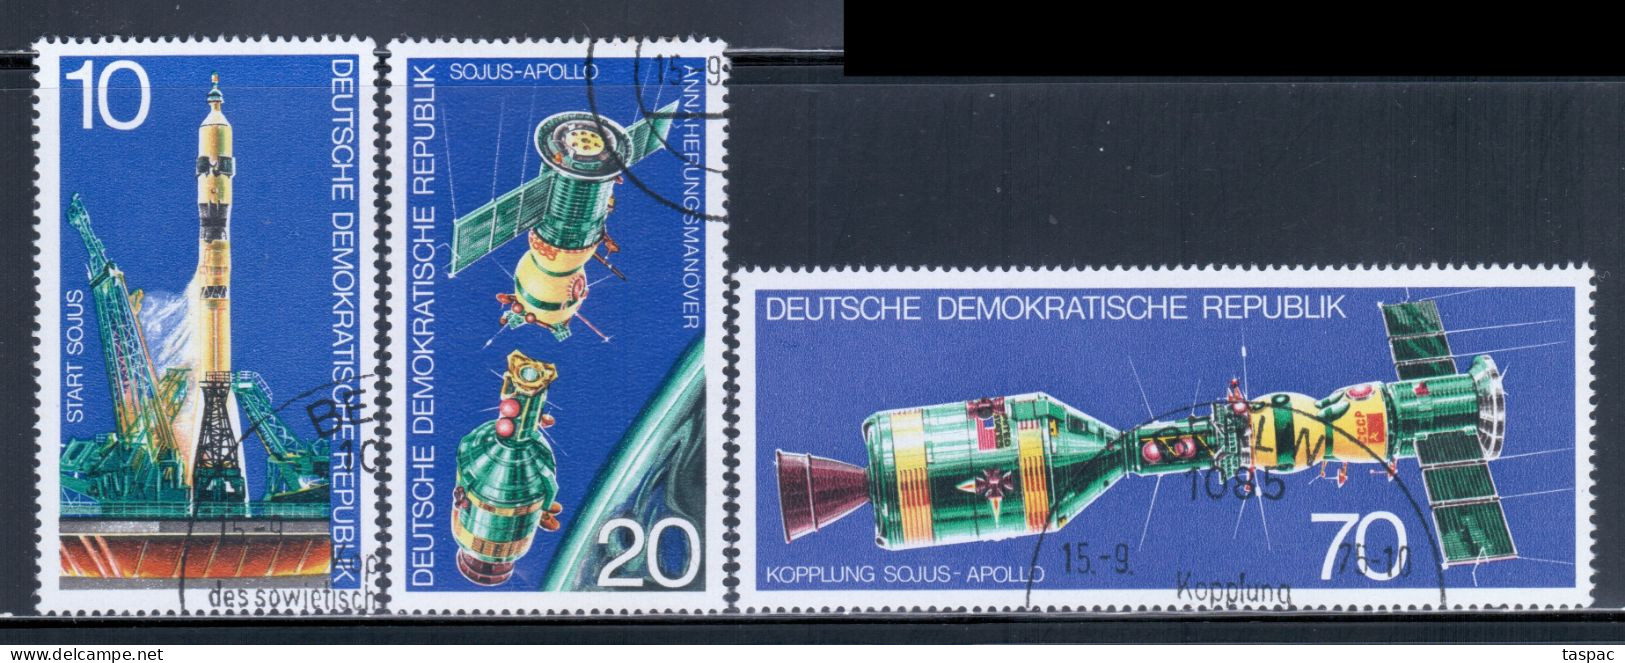 East Germany / DDR 1975 Mi# 2083-2085 Used - Apollo Soyuz Space Test Project - Europa